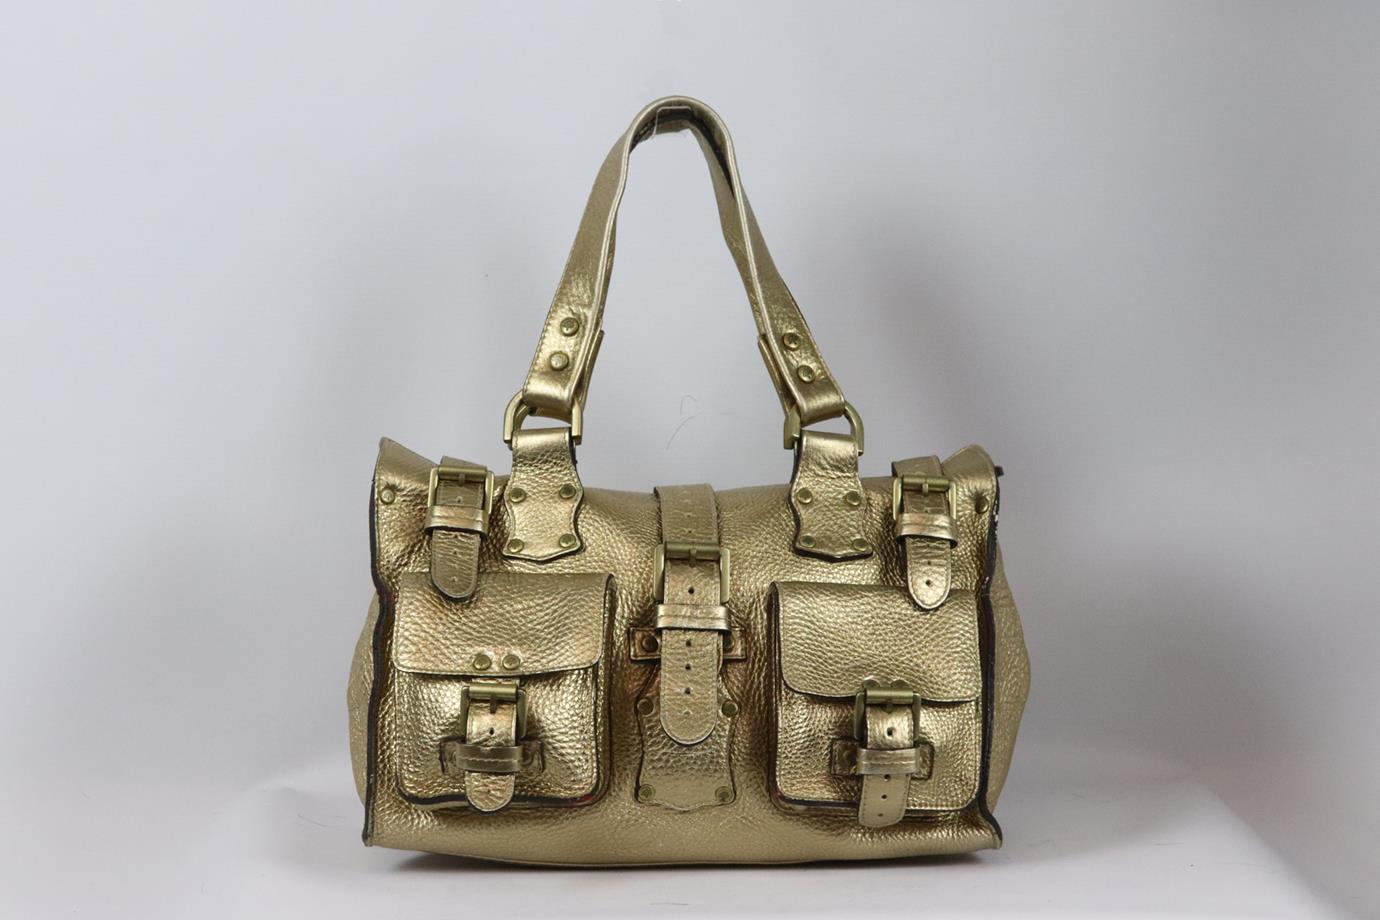 Mulberry Roxanne textured leather shoulder bag. Bronze. Magnetic snap fastening at front. Does not come with dustbag or box. Height: 8 in. Width: 13 in. Depth: 6 in. Strap Drop: 5 in. Fair condition - Marks on back, front, base and handles. Colour